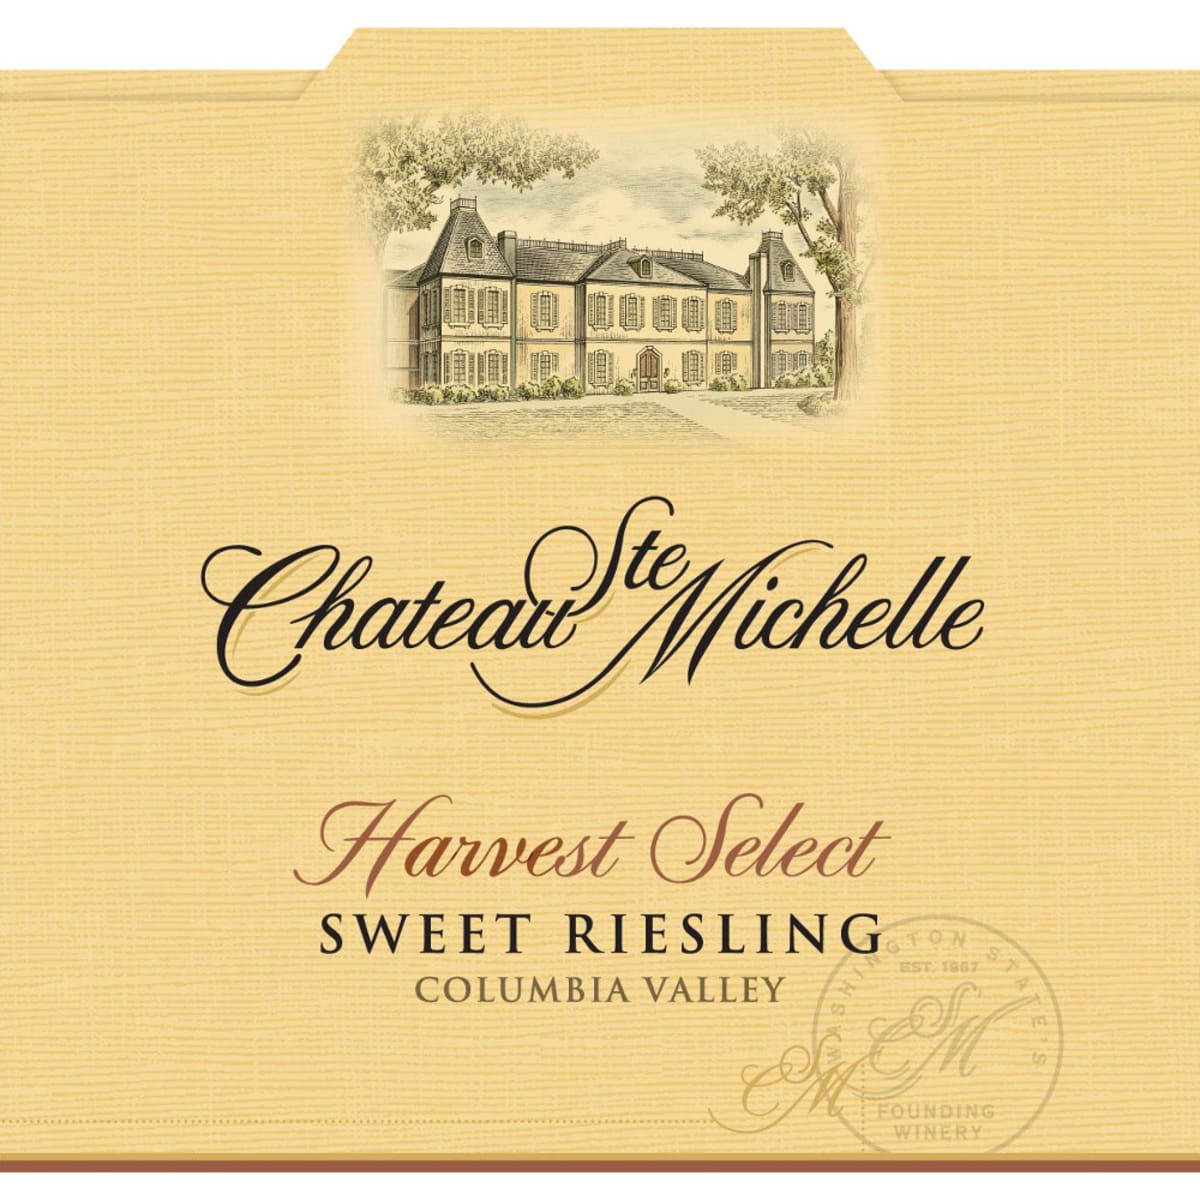 Chateau Ste. Michelle Harvest Select Sweet Riesling 2012 Front Label